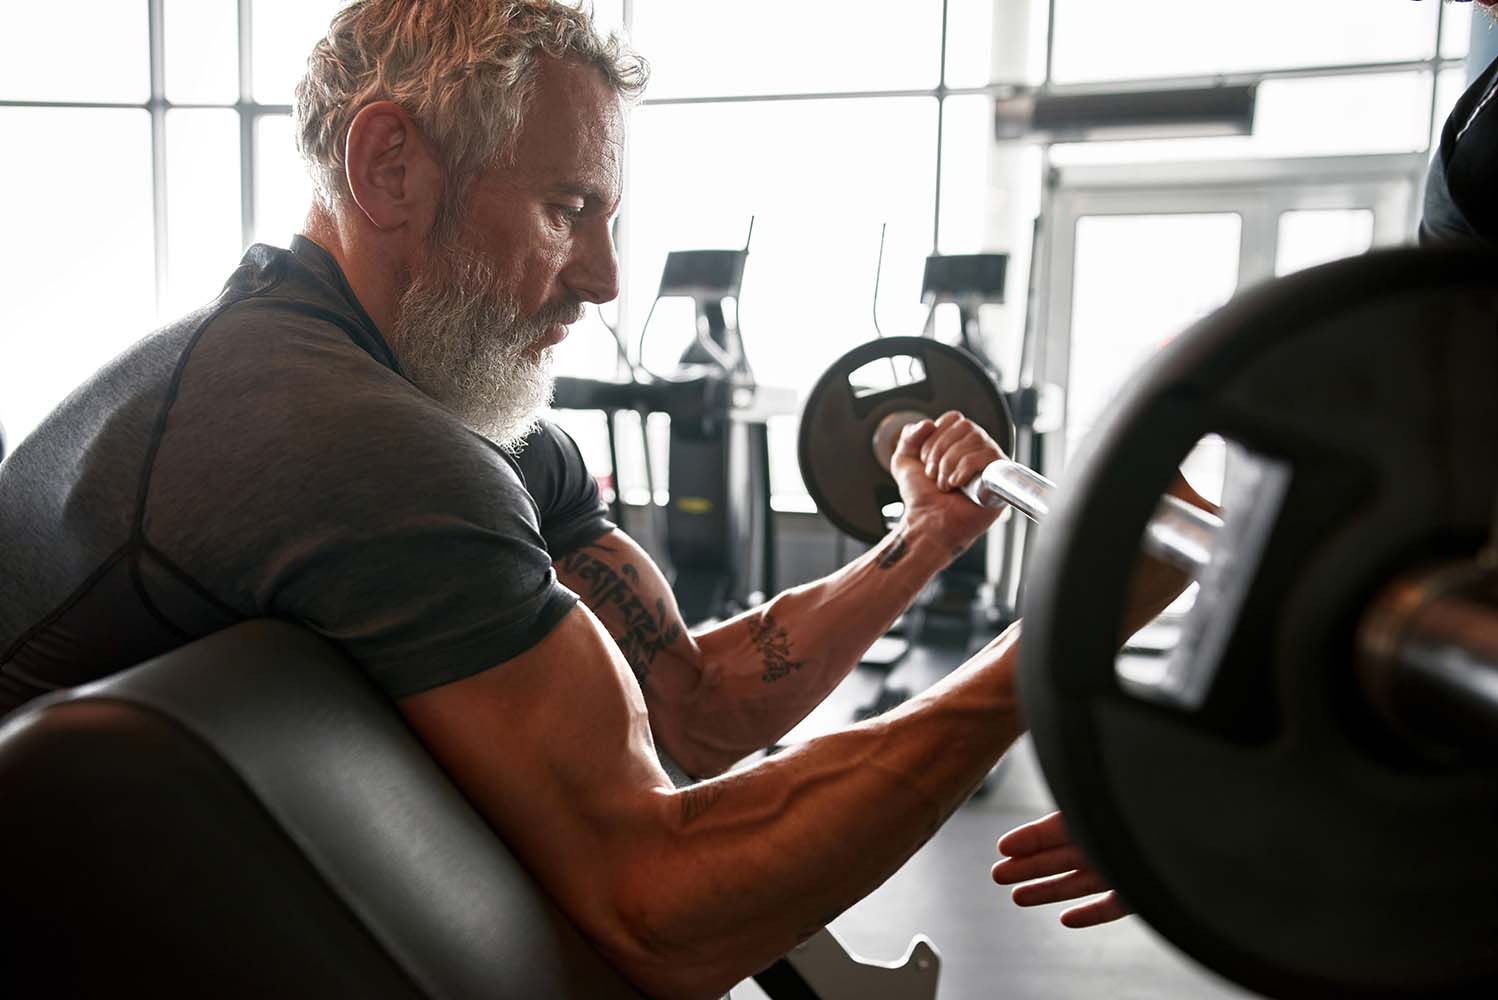 Man in his 60's lifting weights in the gym